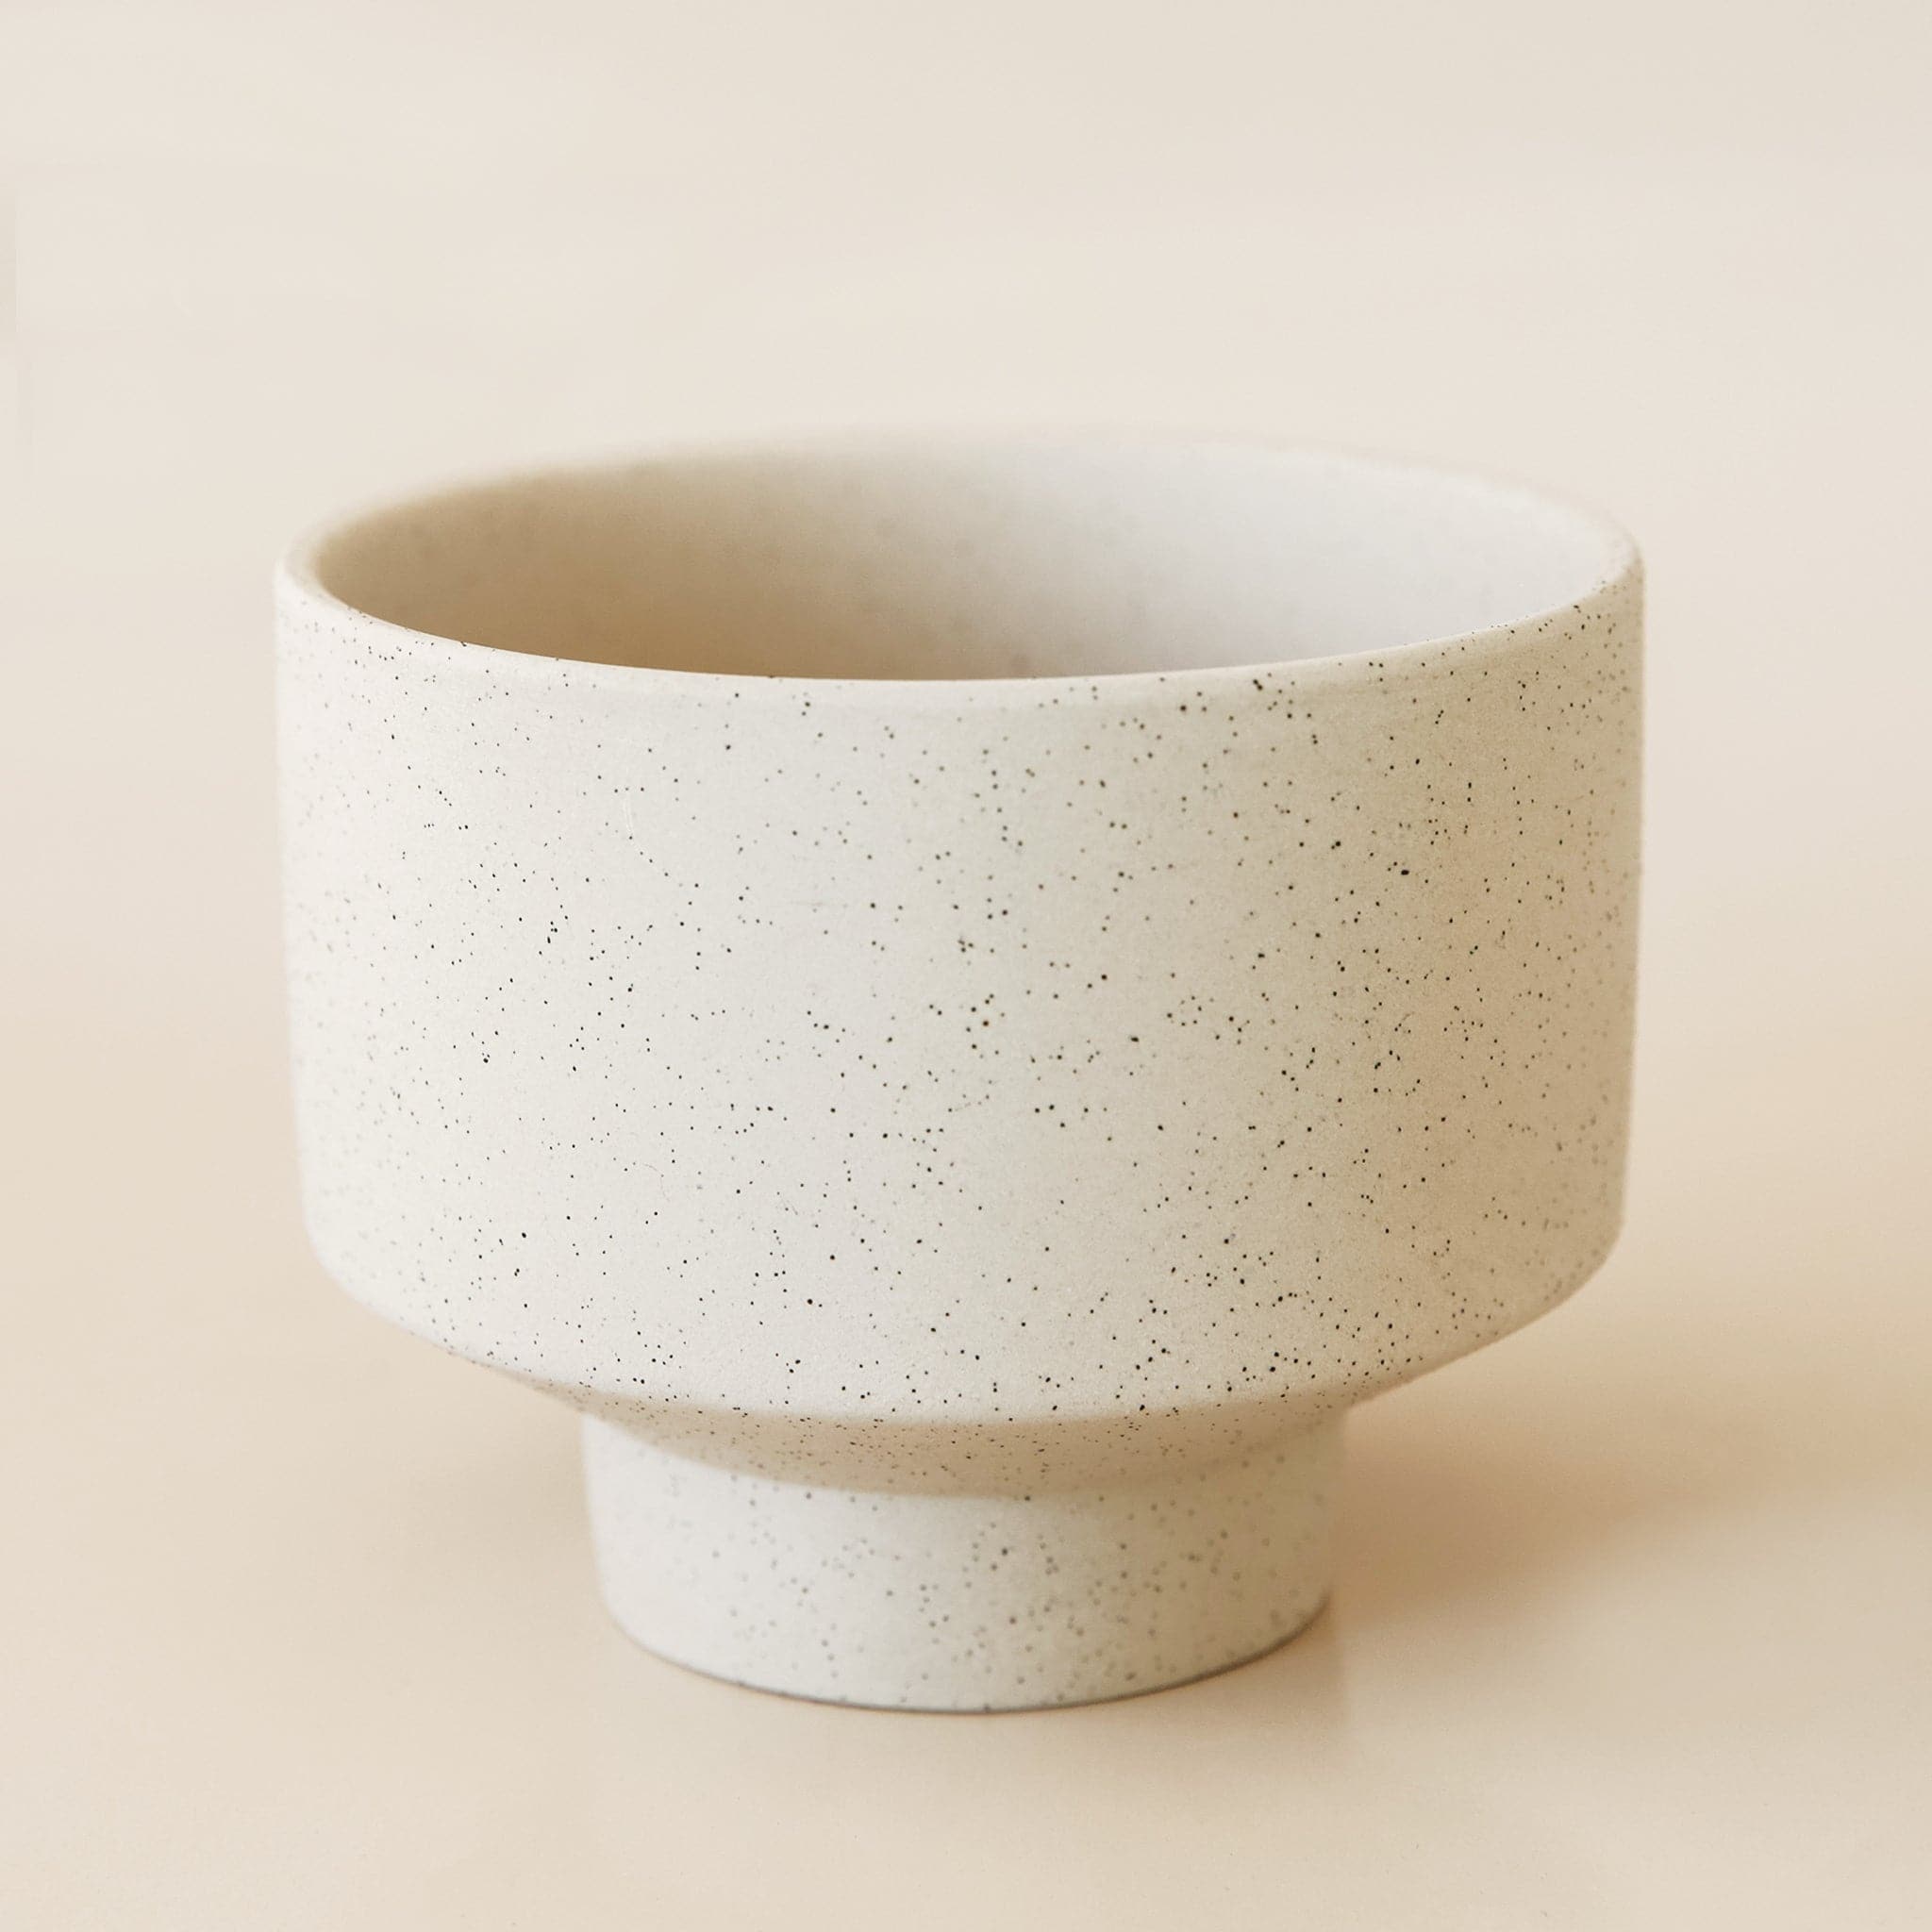 In front of a tan background is a round, ceramic dove pot with a tapered bottom. The pot has black speckles.